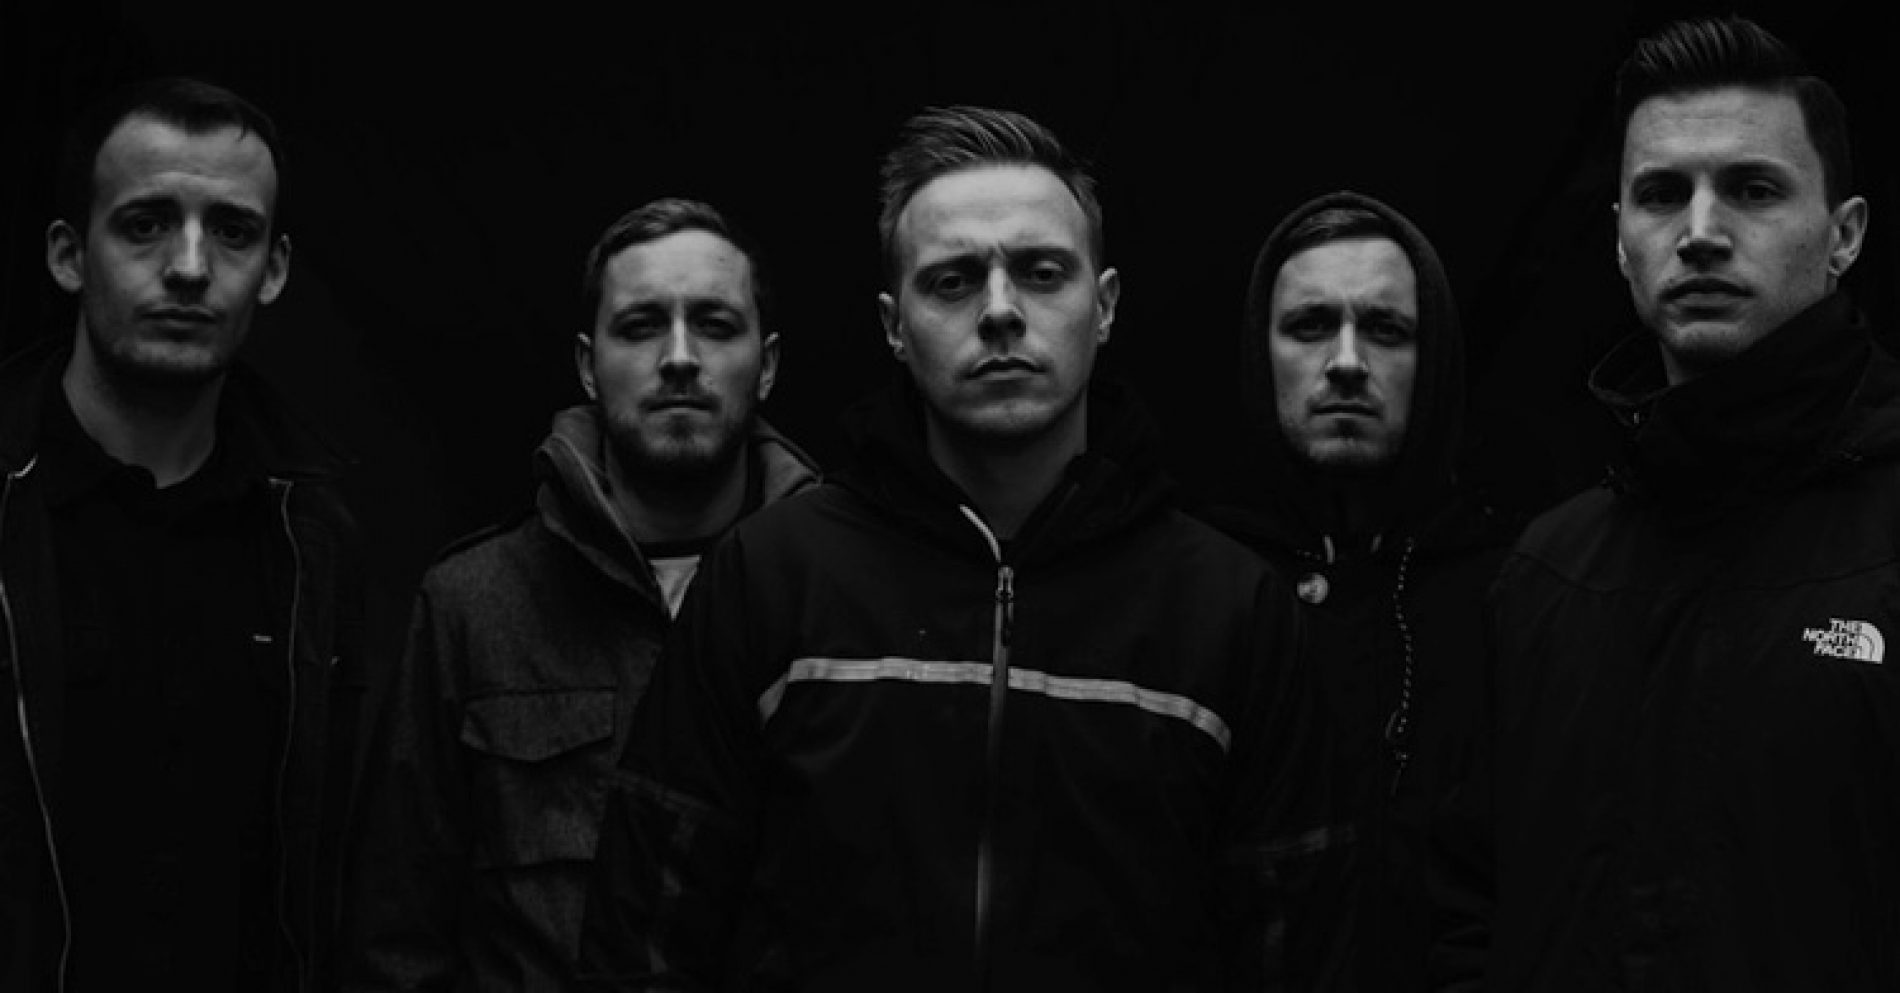 Architects – Gone With The Wind (videoclip nou)